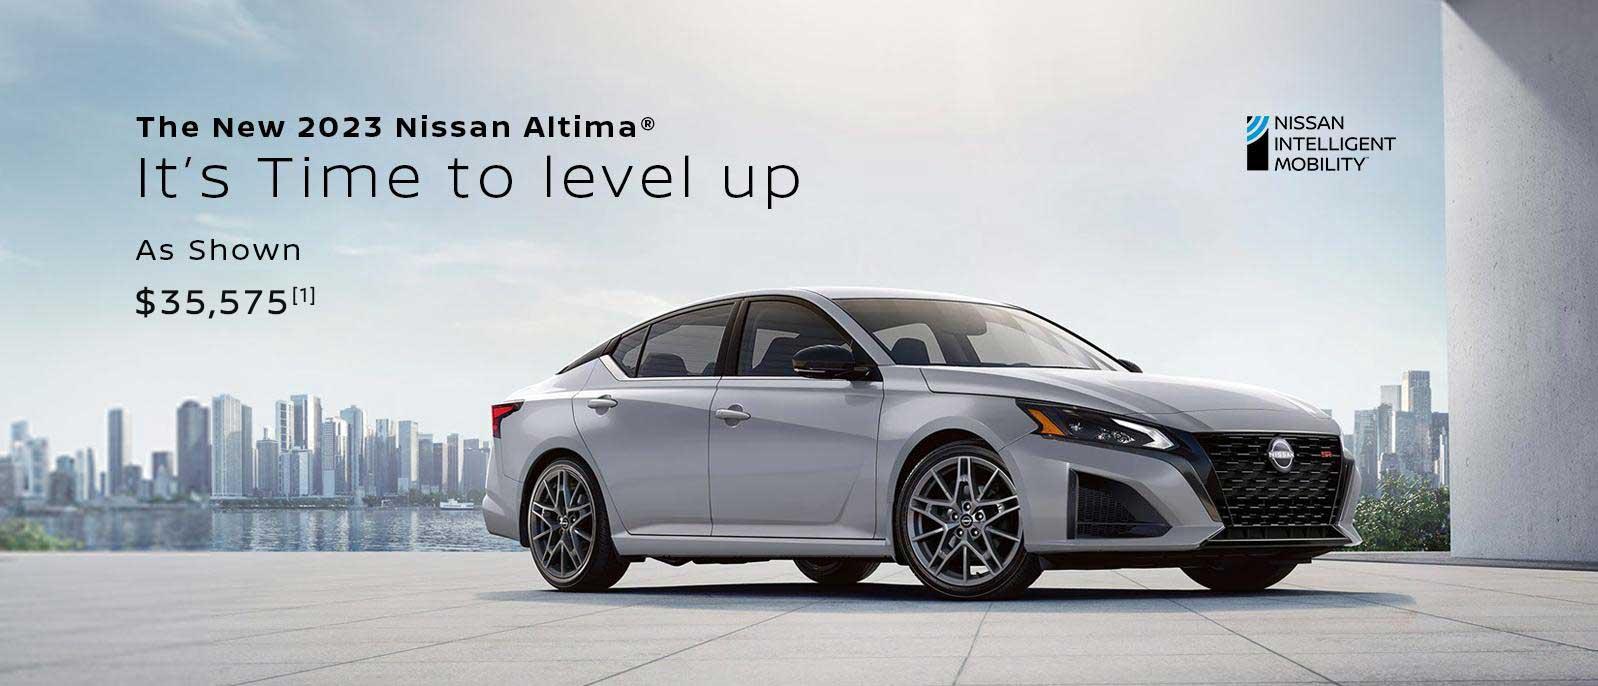 The New 2023 Nissan Altima - As shown $35,385*